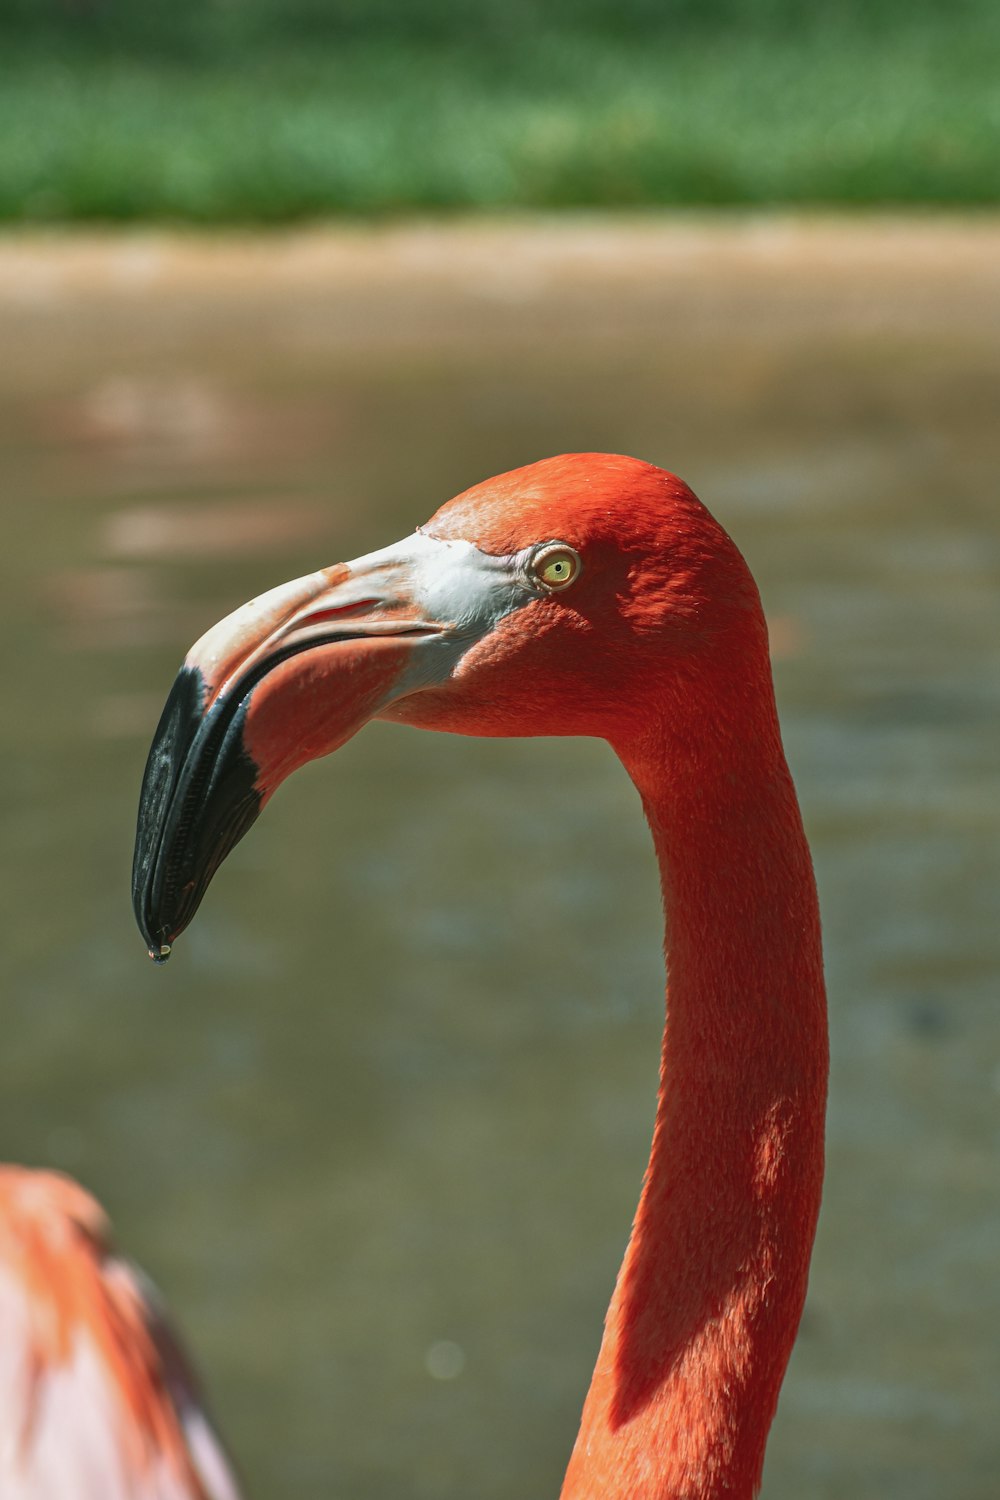 a close up of a flamingo near a body of water